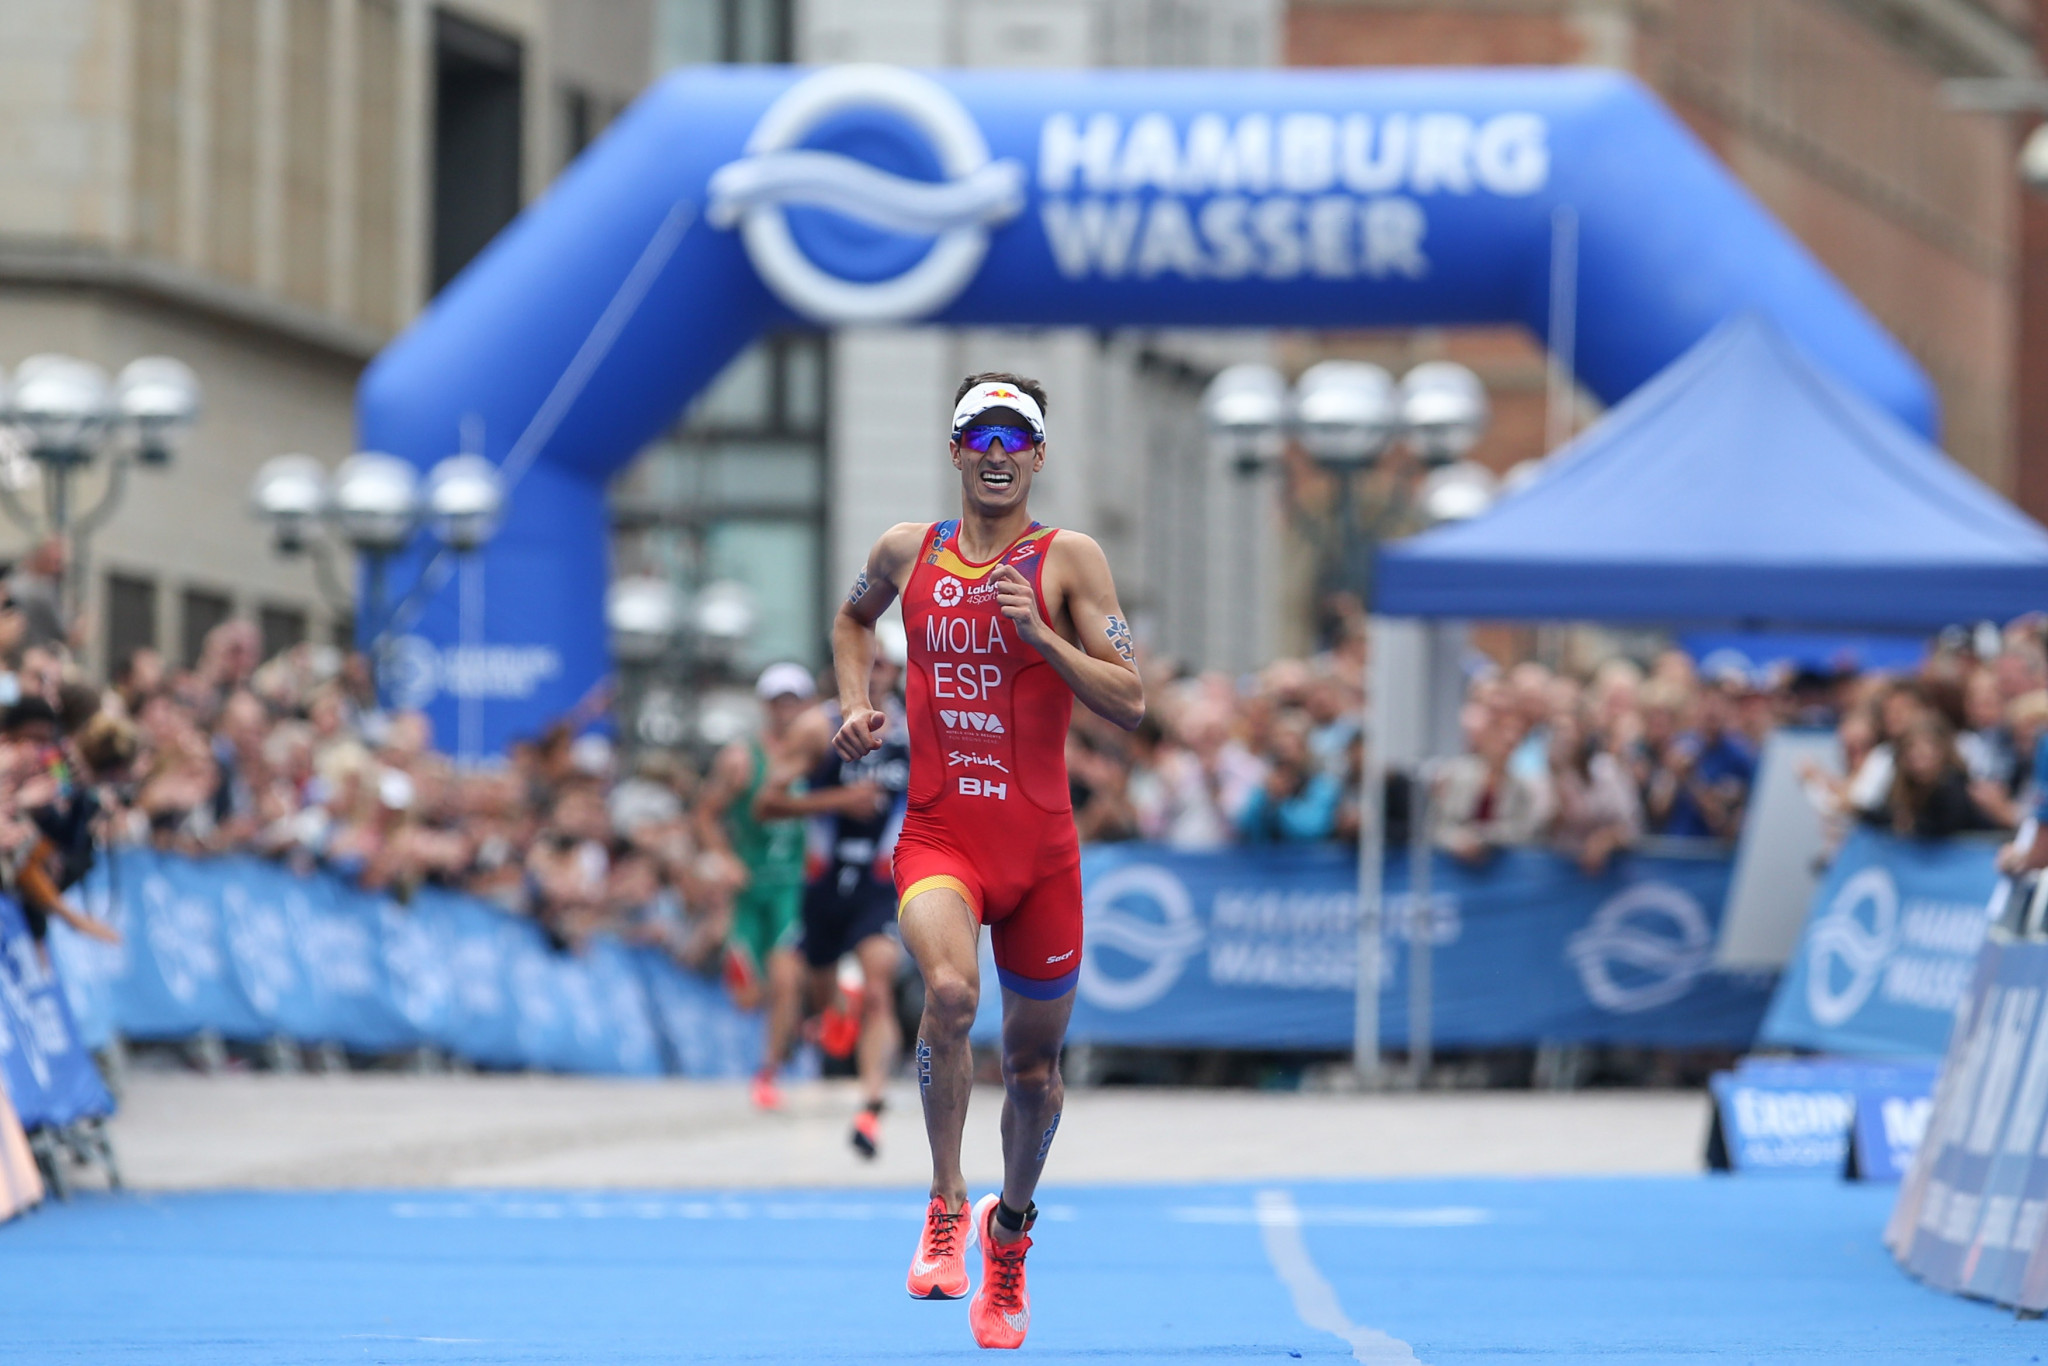 Three-time world triathlon champion Mario Mola of Spain is among the star names set to compete at the World Triathlon Multisport Championships in Ibiza ©Getty Images